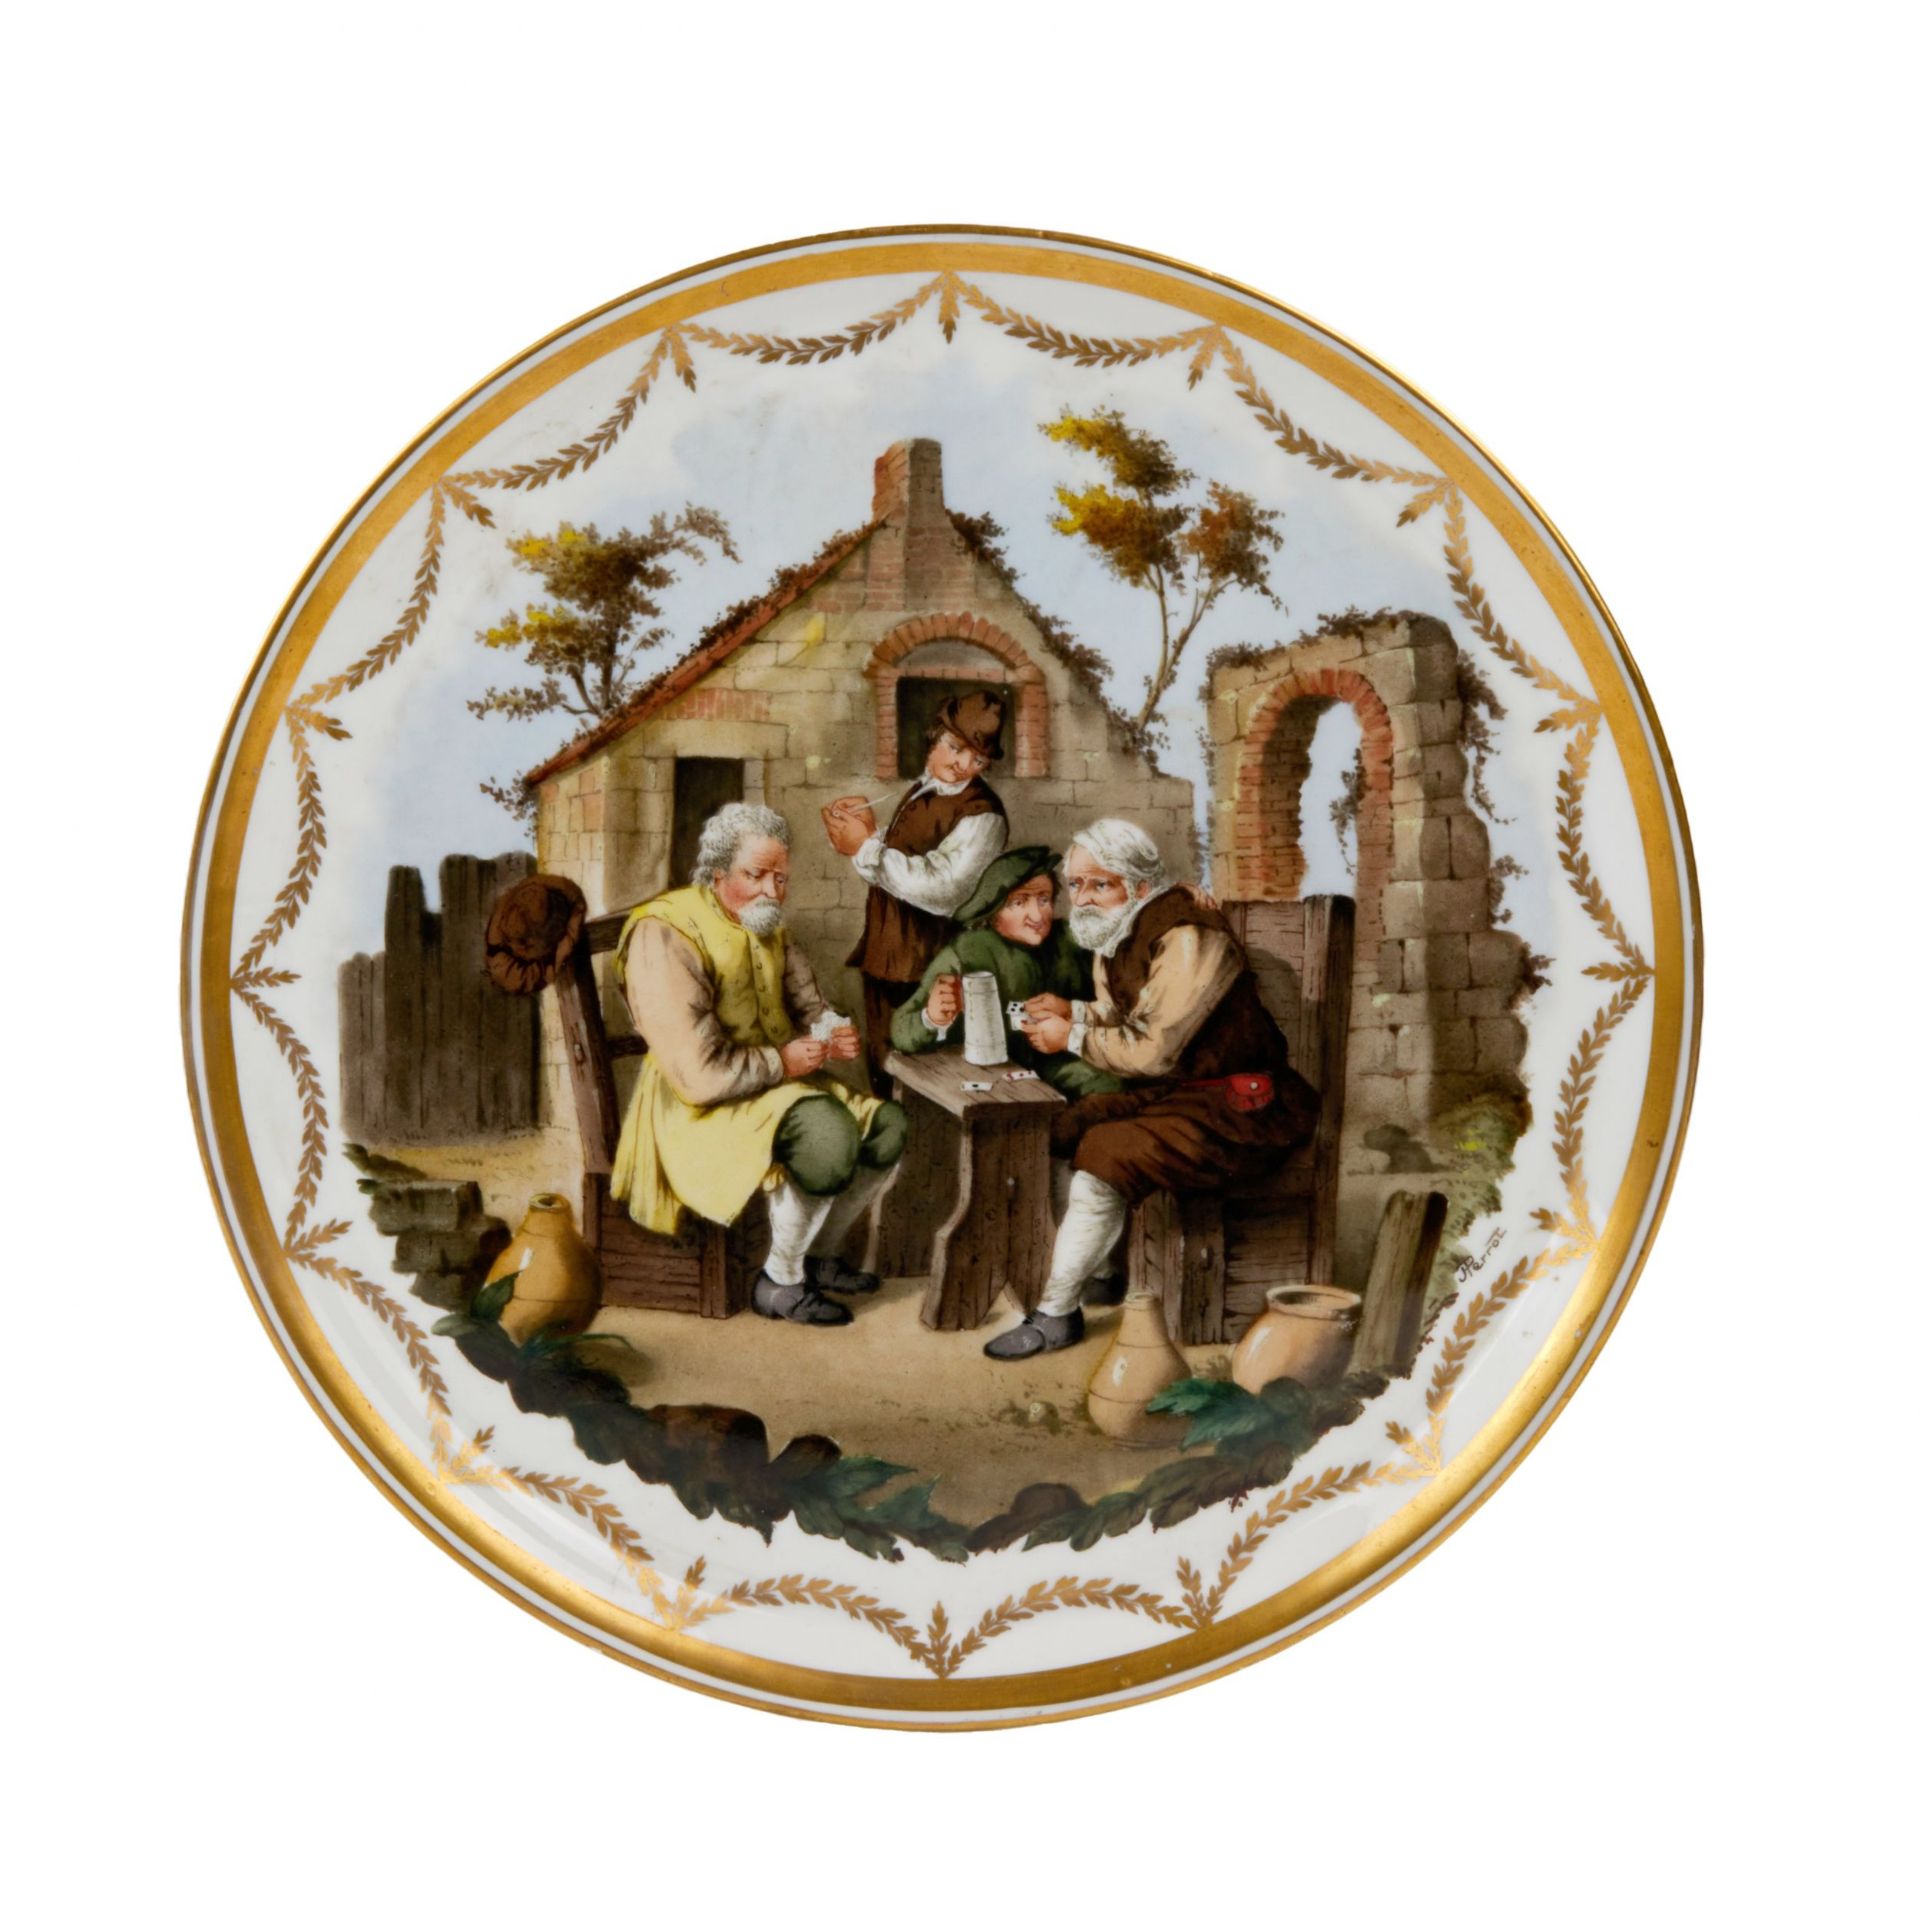 French tete-a-tete porcelain service, 19th century. - Image 18 of 19